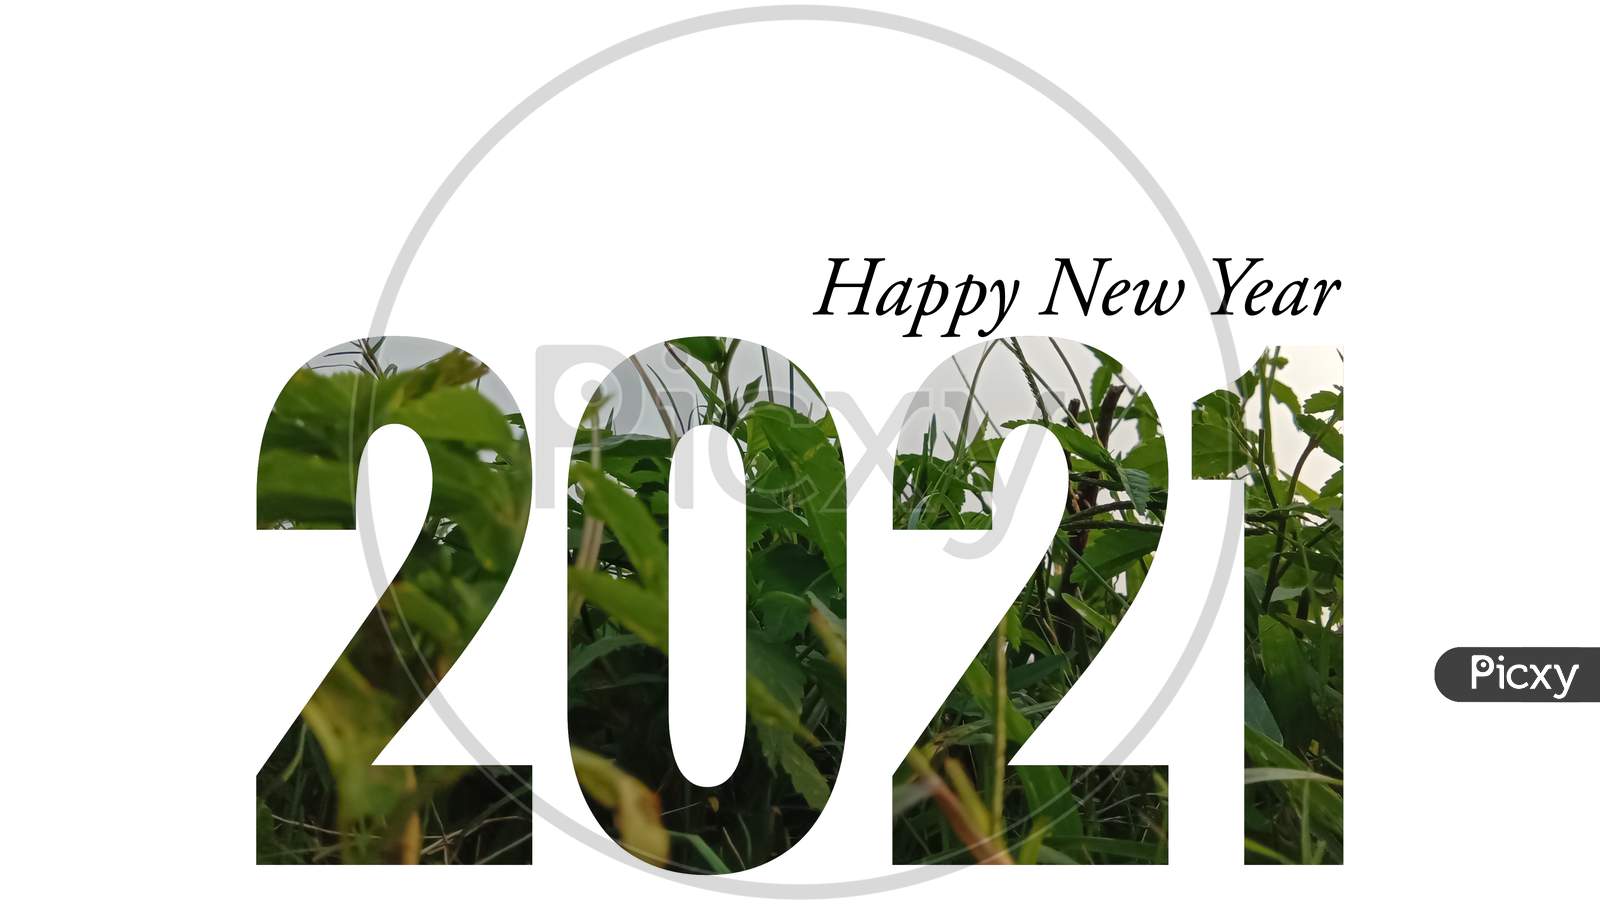 Happy New Year 2021 text on white background, nature digital illustration.